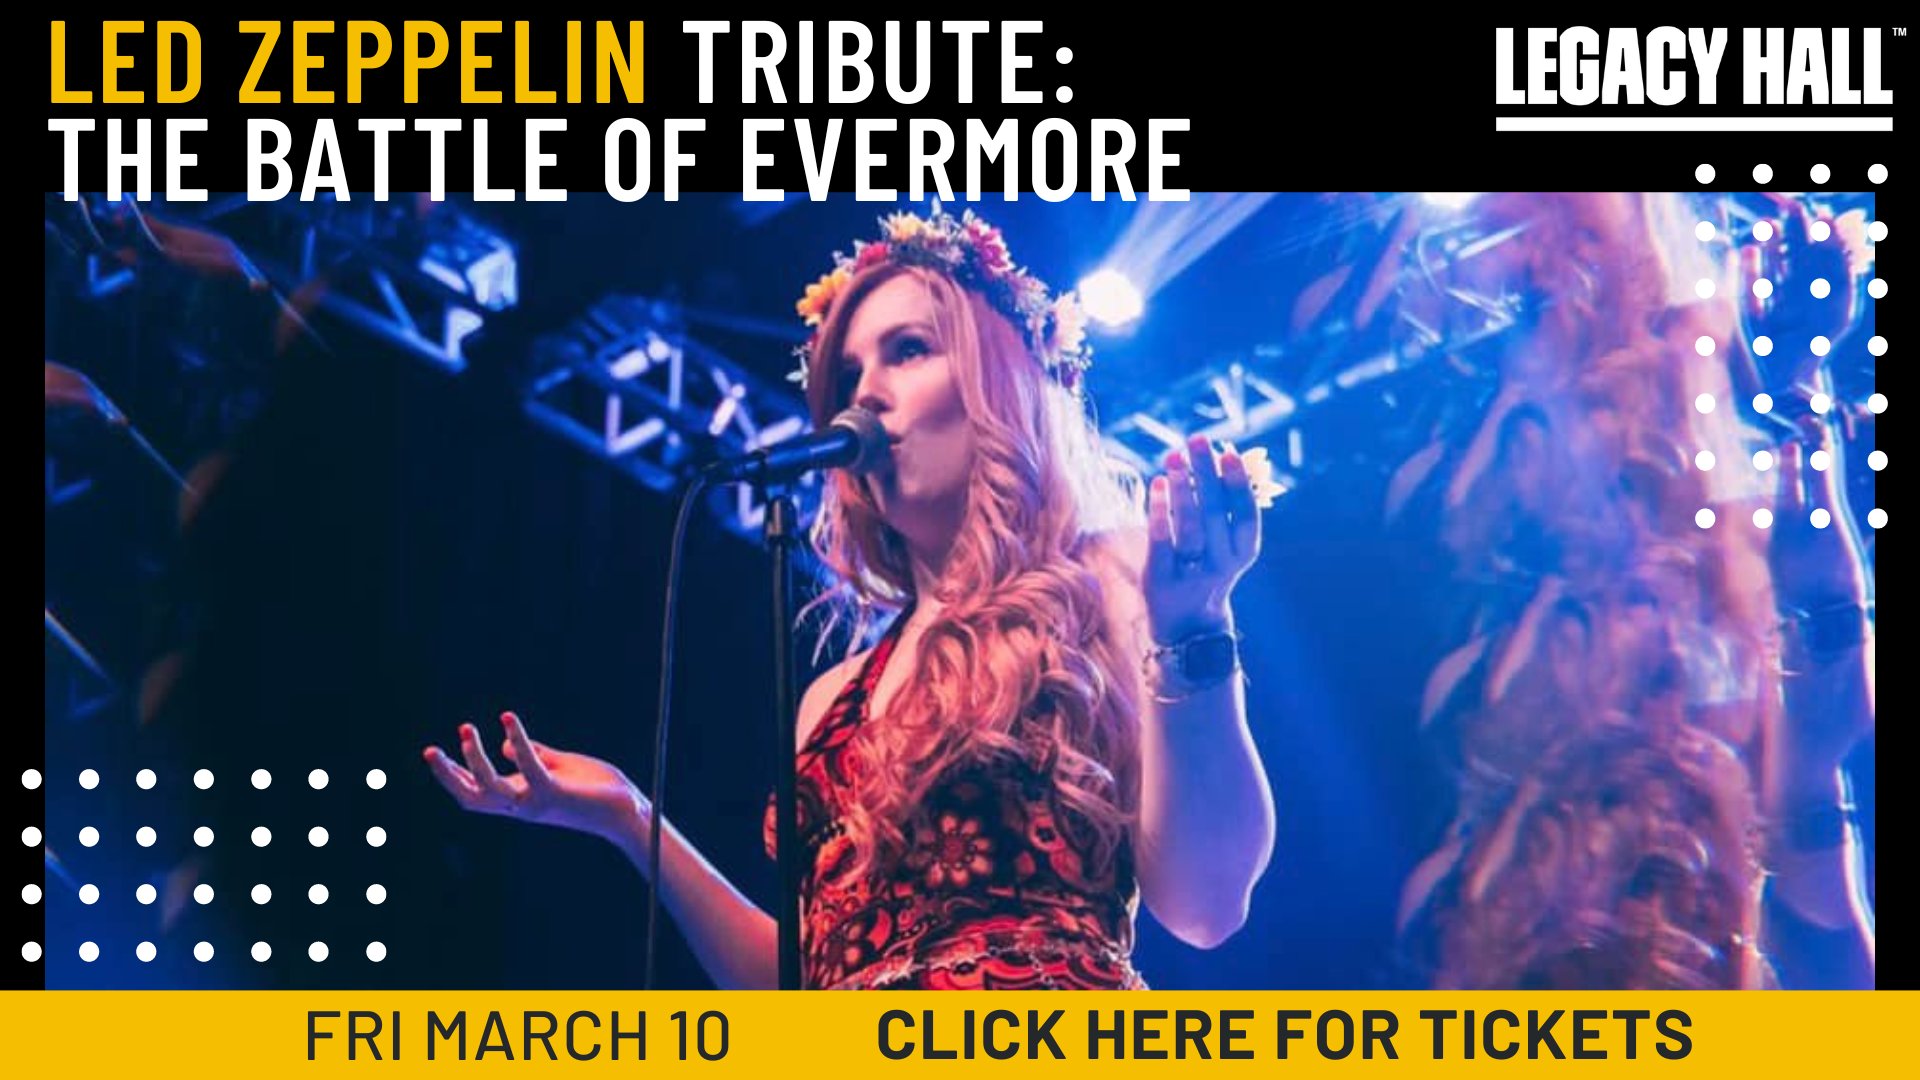 Led Zeppelin Tribute - The Battle Of Evermore